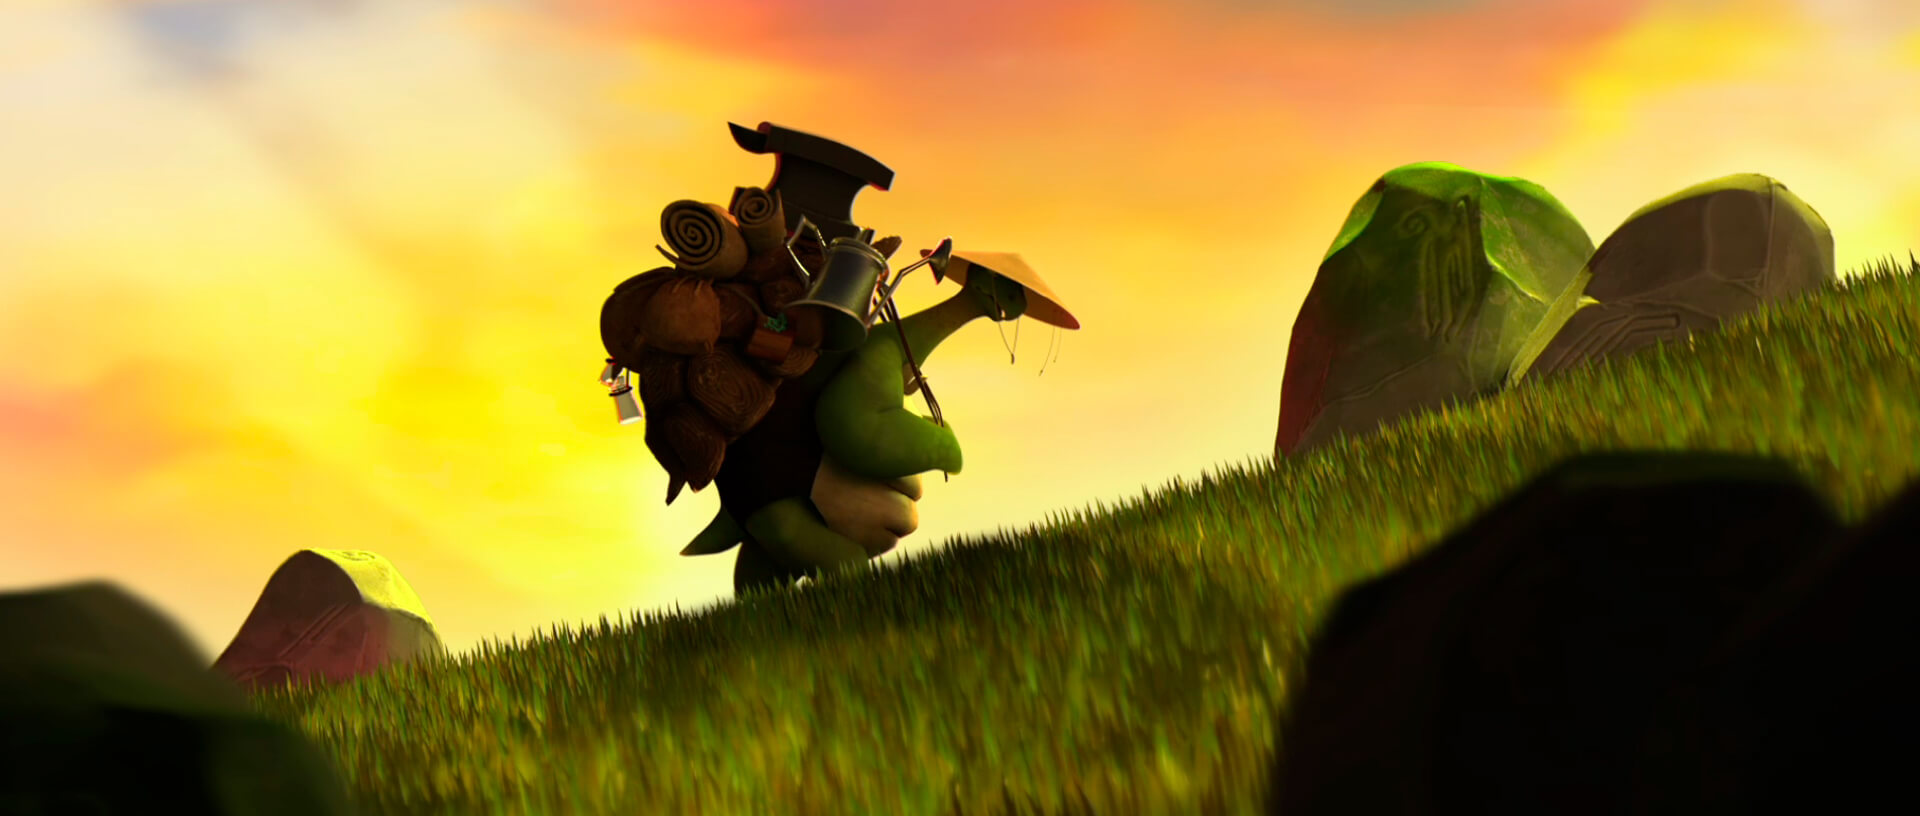 Turtle character with a backpack on a hilltop, looking at a bridge over a chasm, under a vibrant sunset sky.